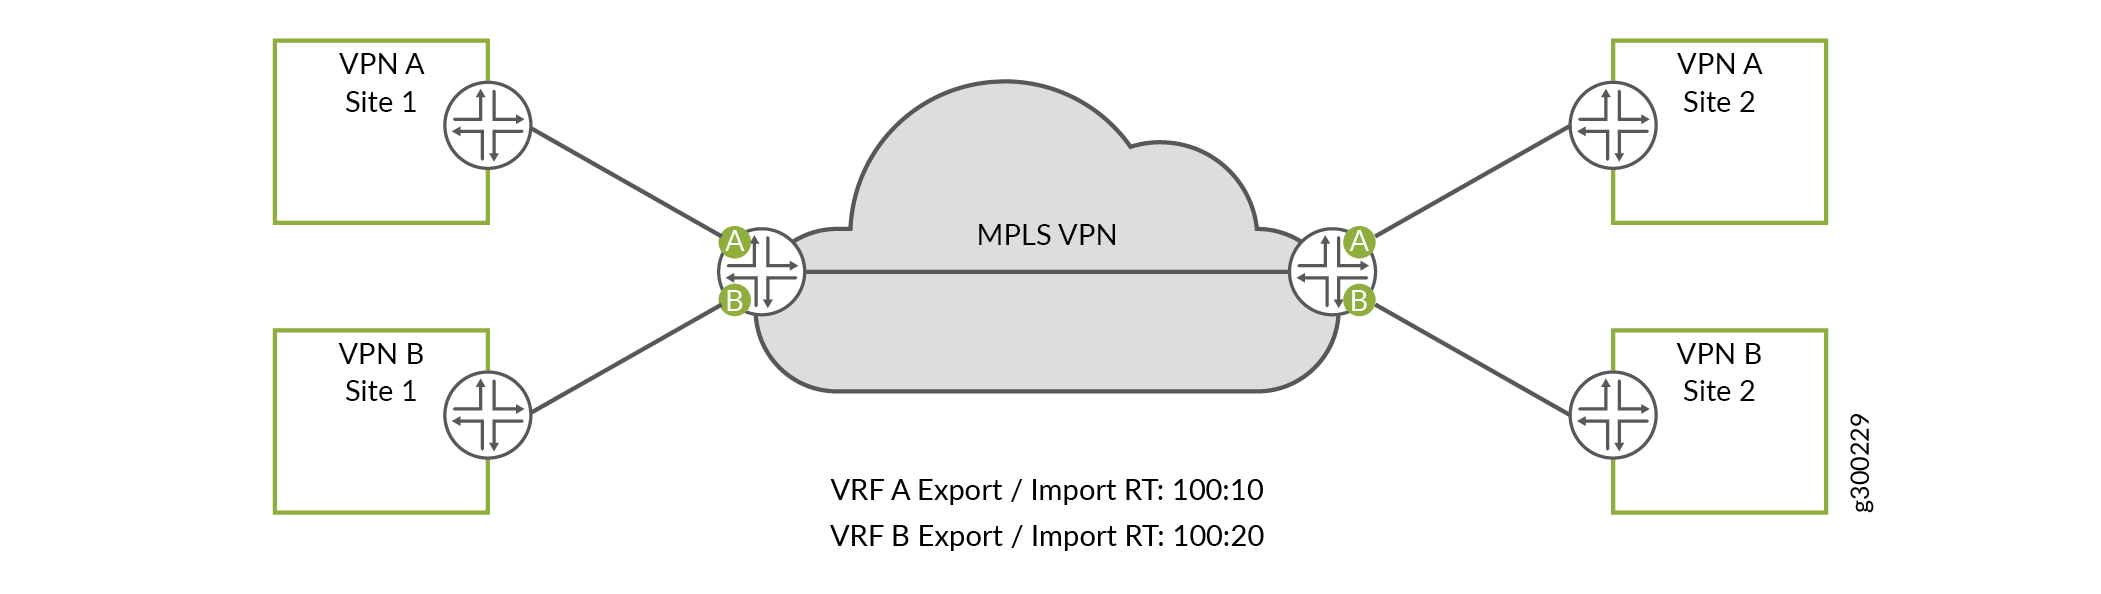 Route Separation Example - MPLS VPNs